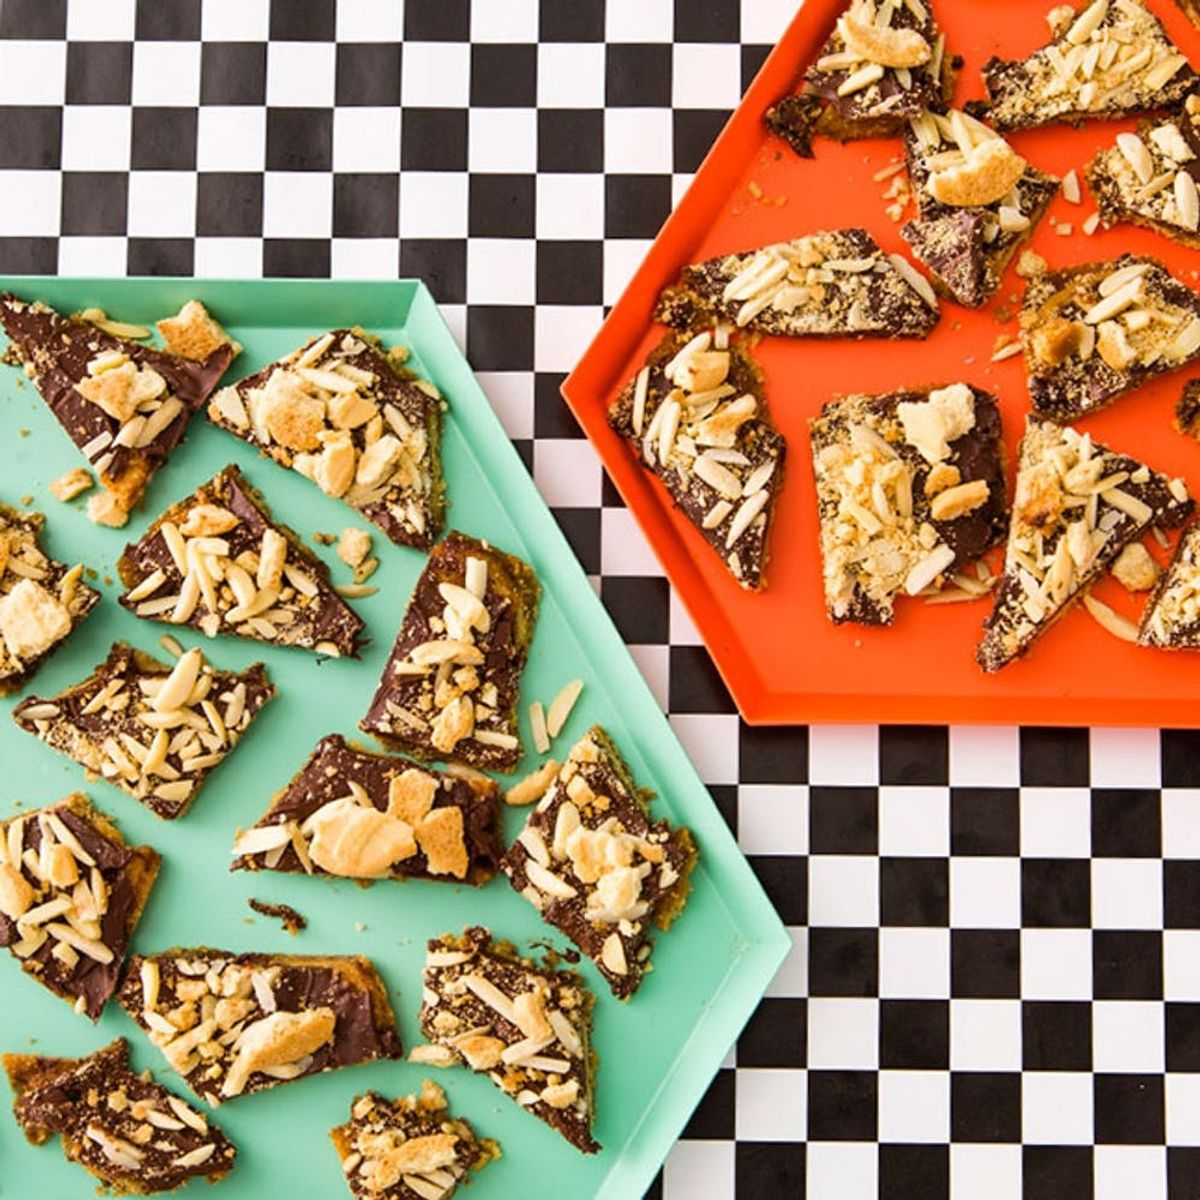 Here’s How to Put Those Frozen Girl Scout Cookies to Use